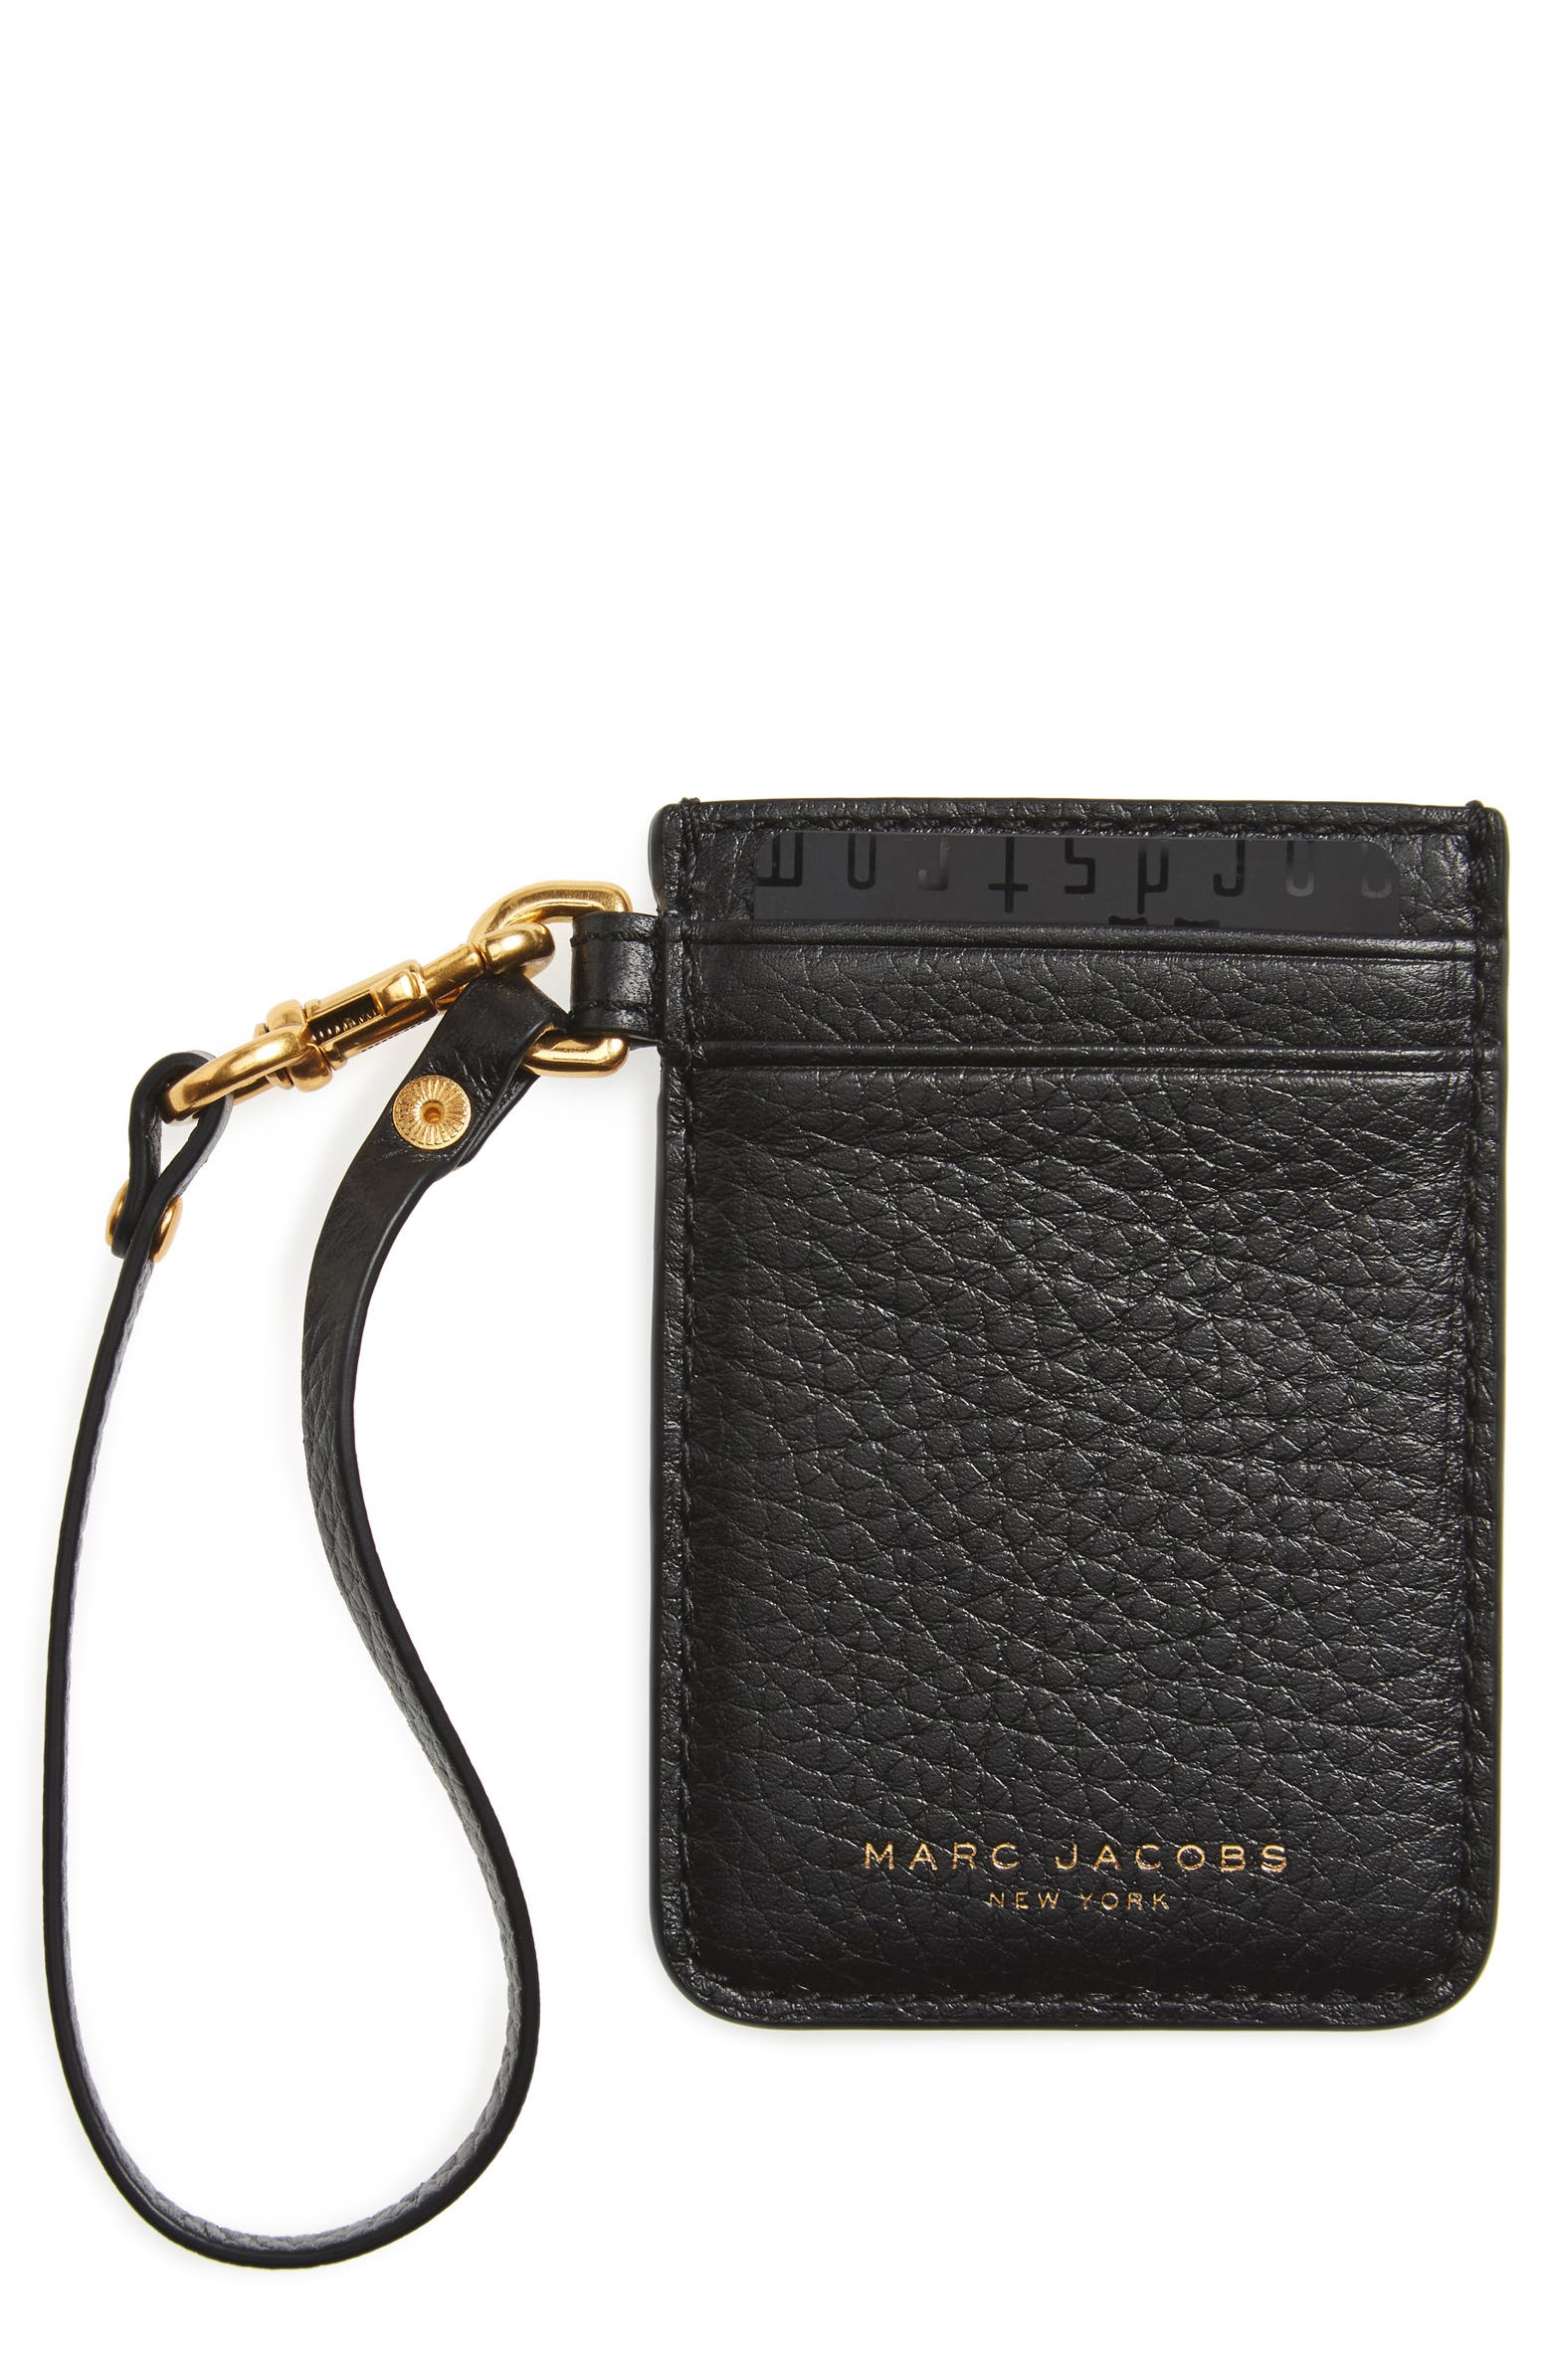 MARC JACOBS Commuter Leather Card Case | Nordstrom